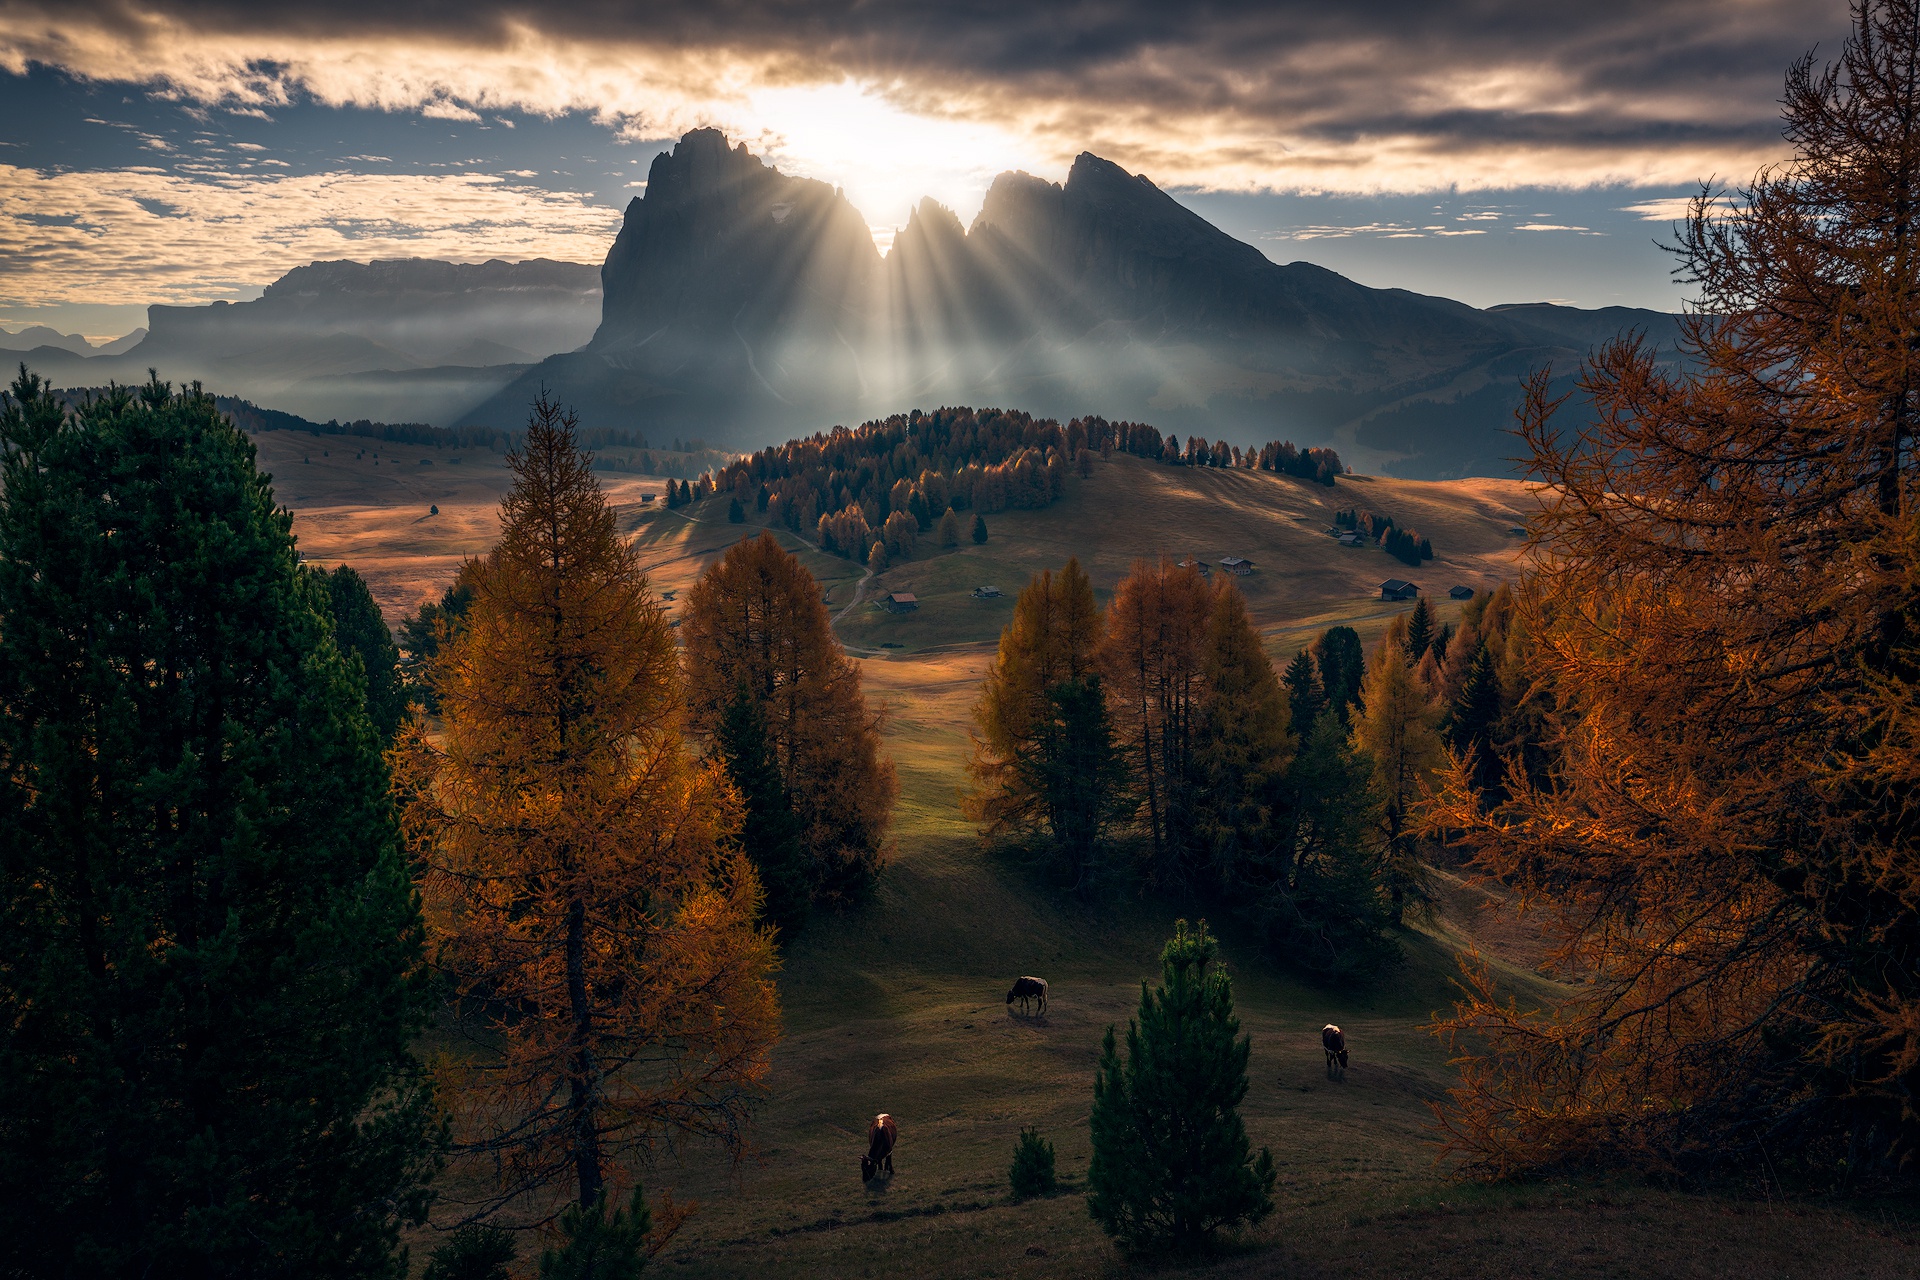 Dolomites (mountains), Nature, Fall, Clouds, Animals Wallpaper